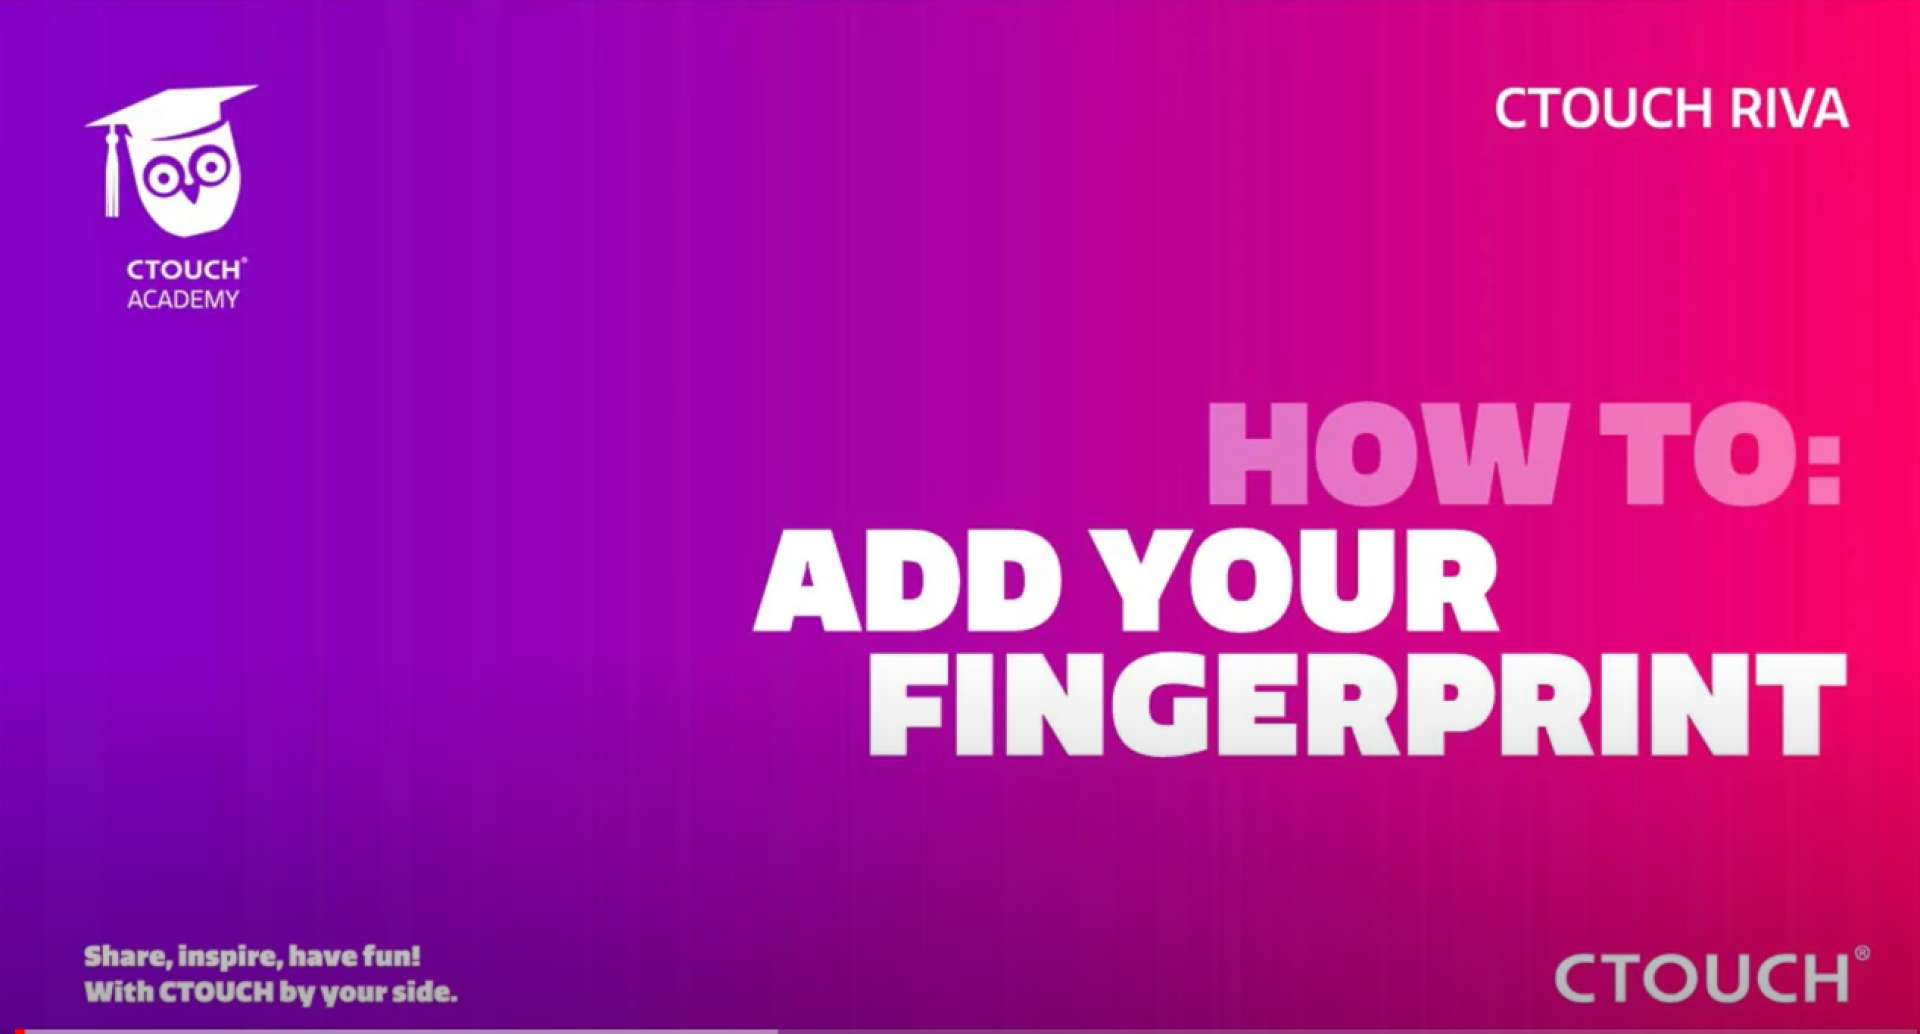 Academy how to add your fingerprint